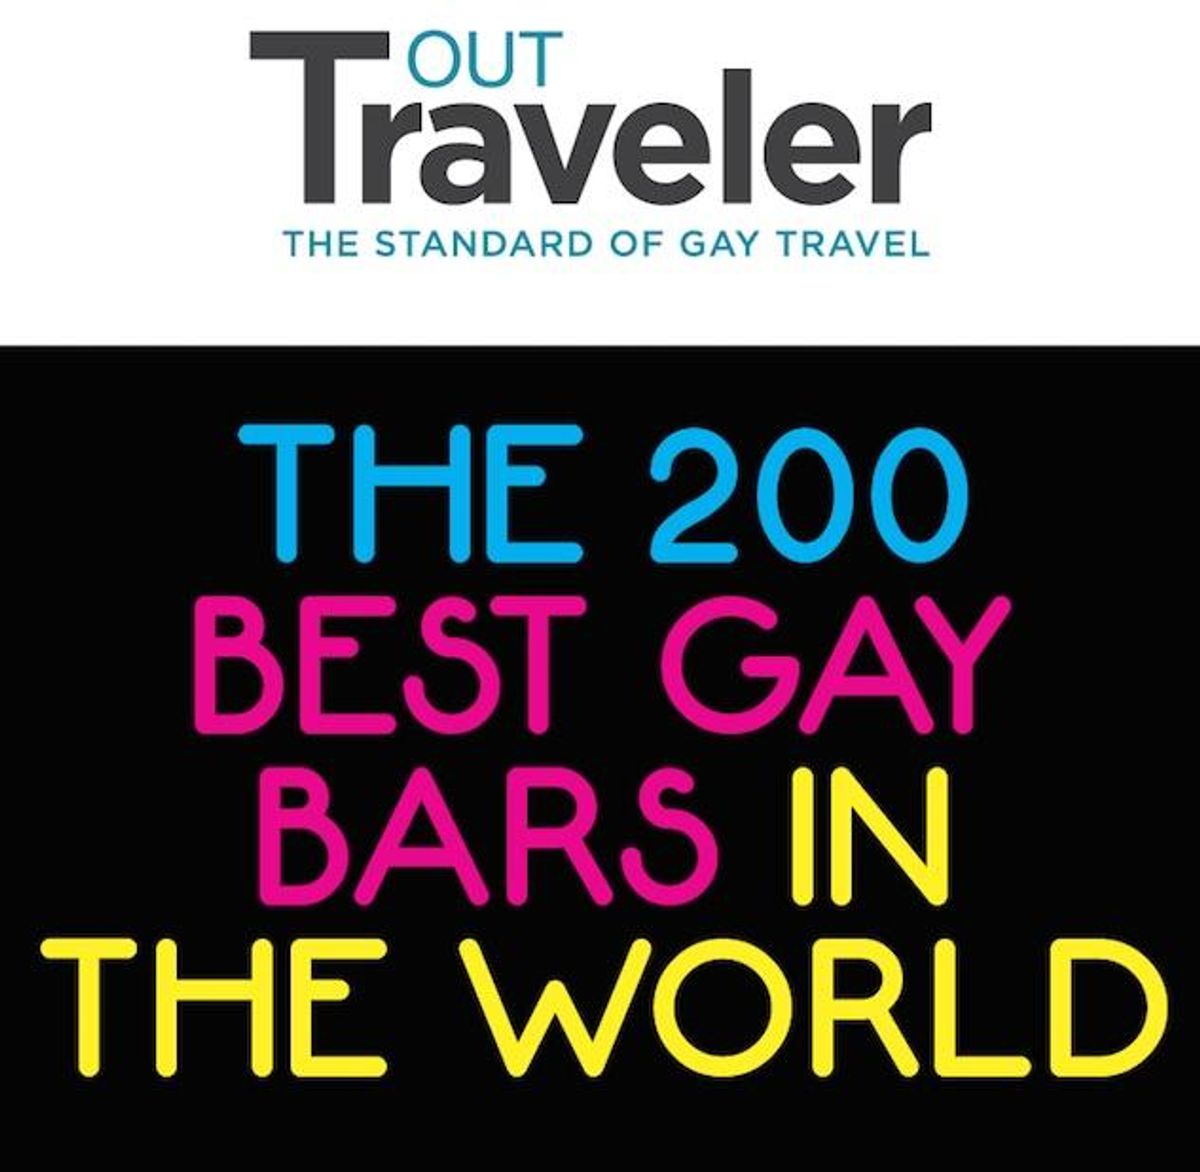 OutTraveler's 200 of the Greatest Gay Bars in the World